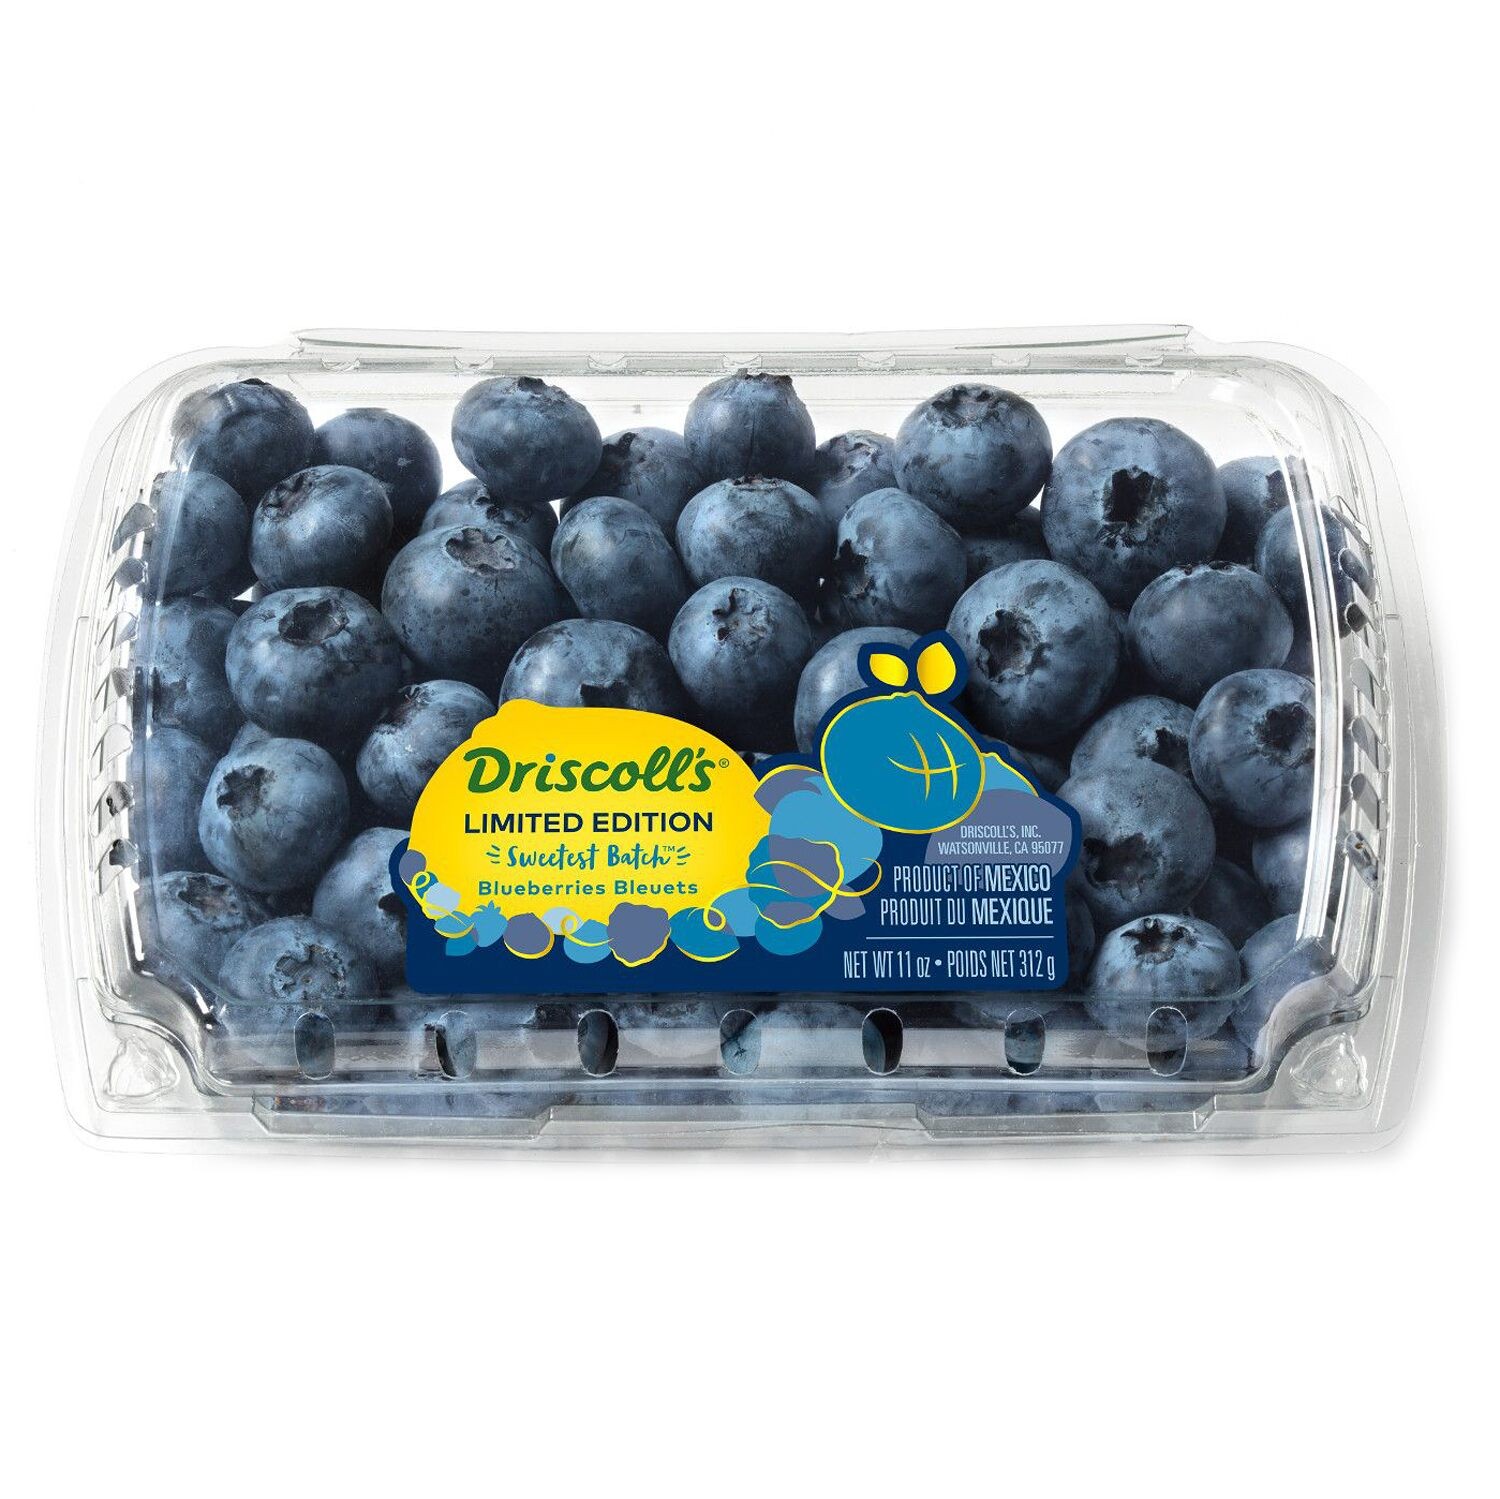 driscolls-sweetest-batch-blueberries-product-of-mexico